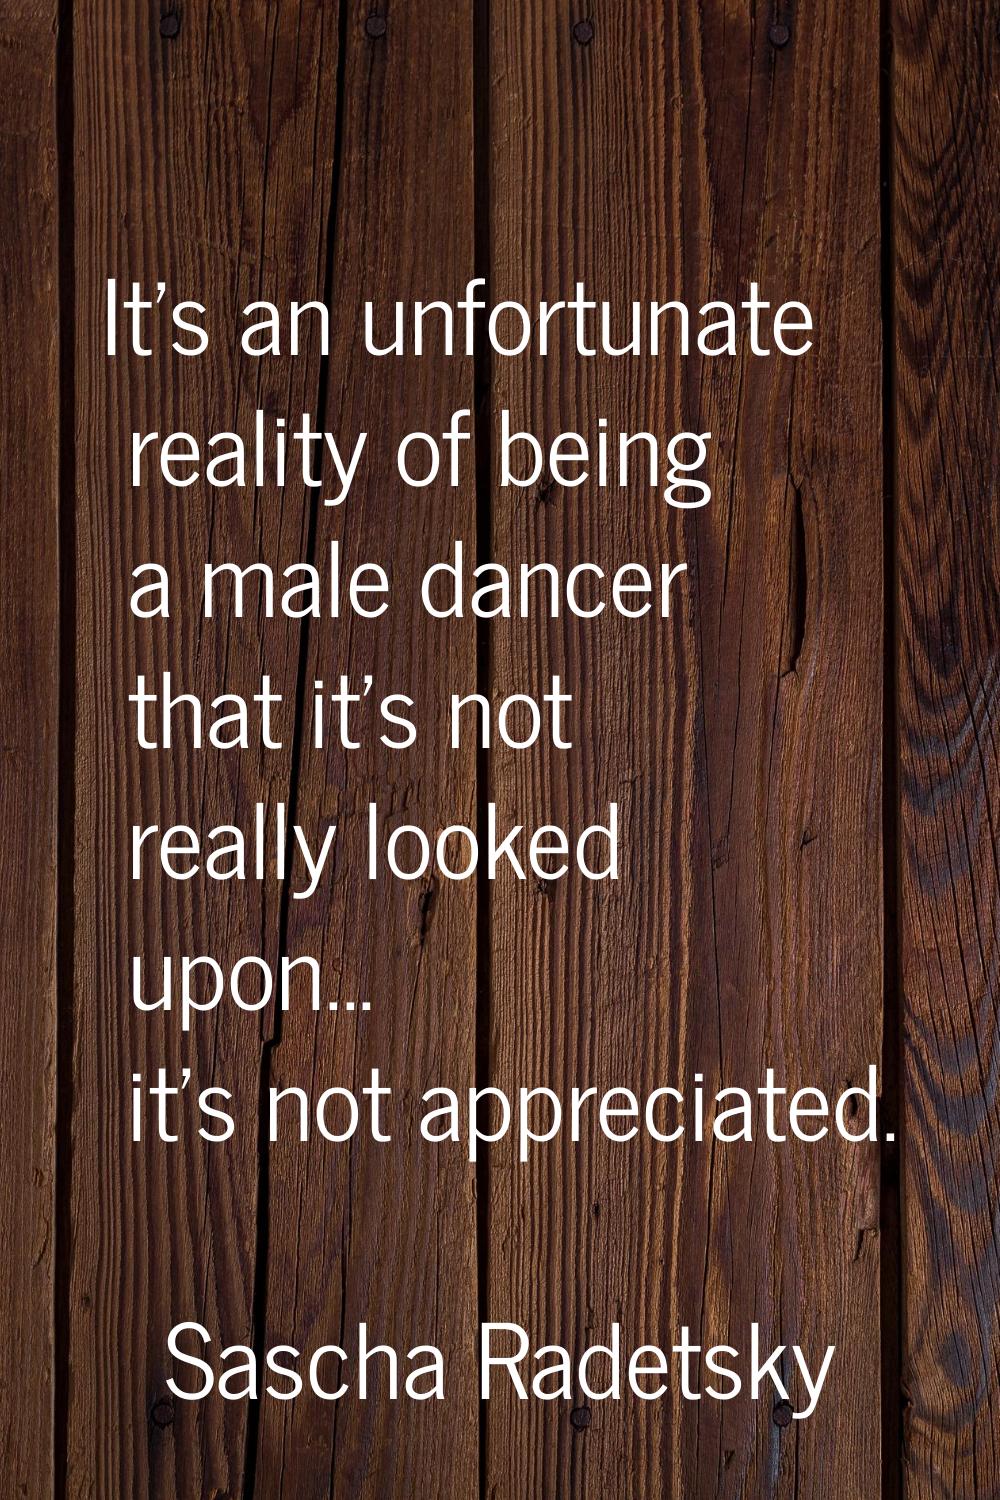 It's an unfortunate reality of being a male dancer that it's not really looked upon... it's not app